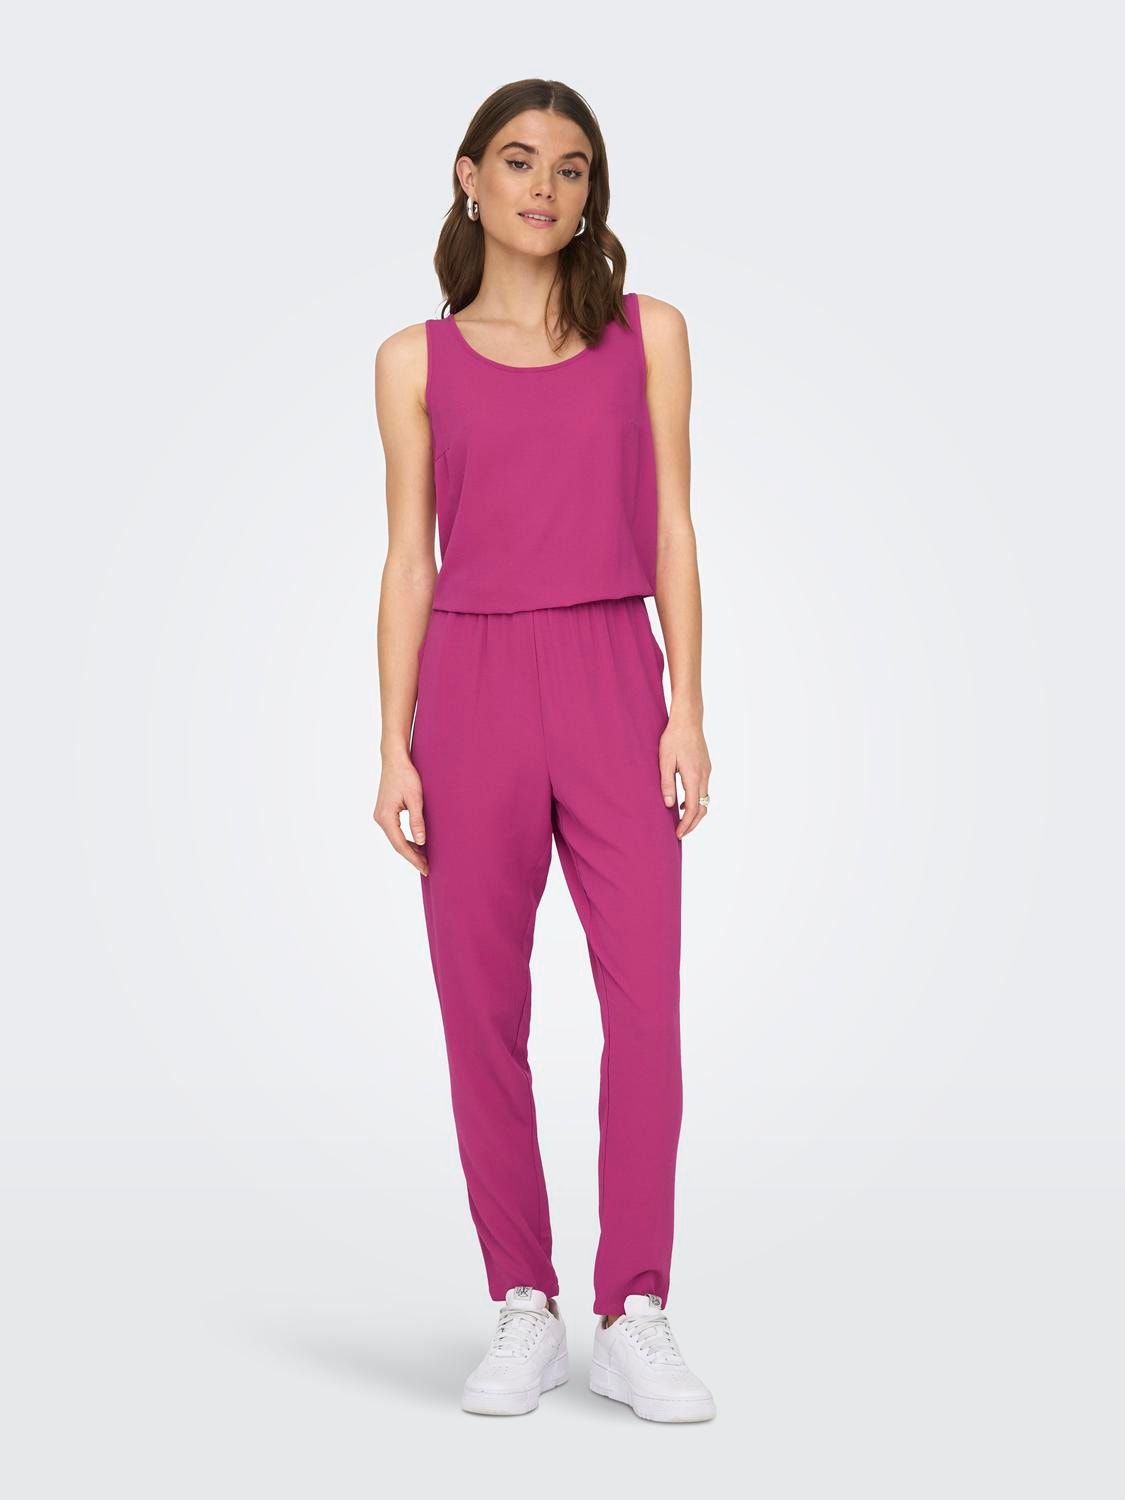 ONLY Mittlere Taille Jumpsuit -Very Berry - 15236581